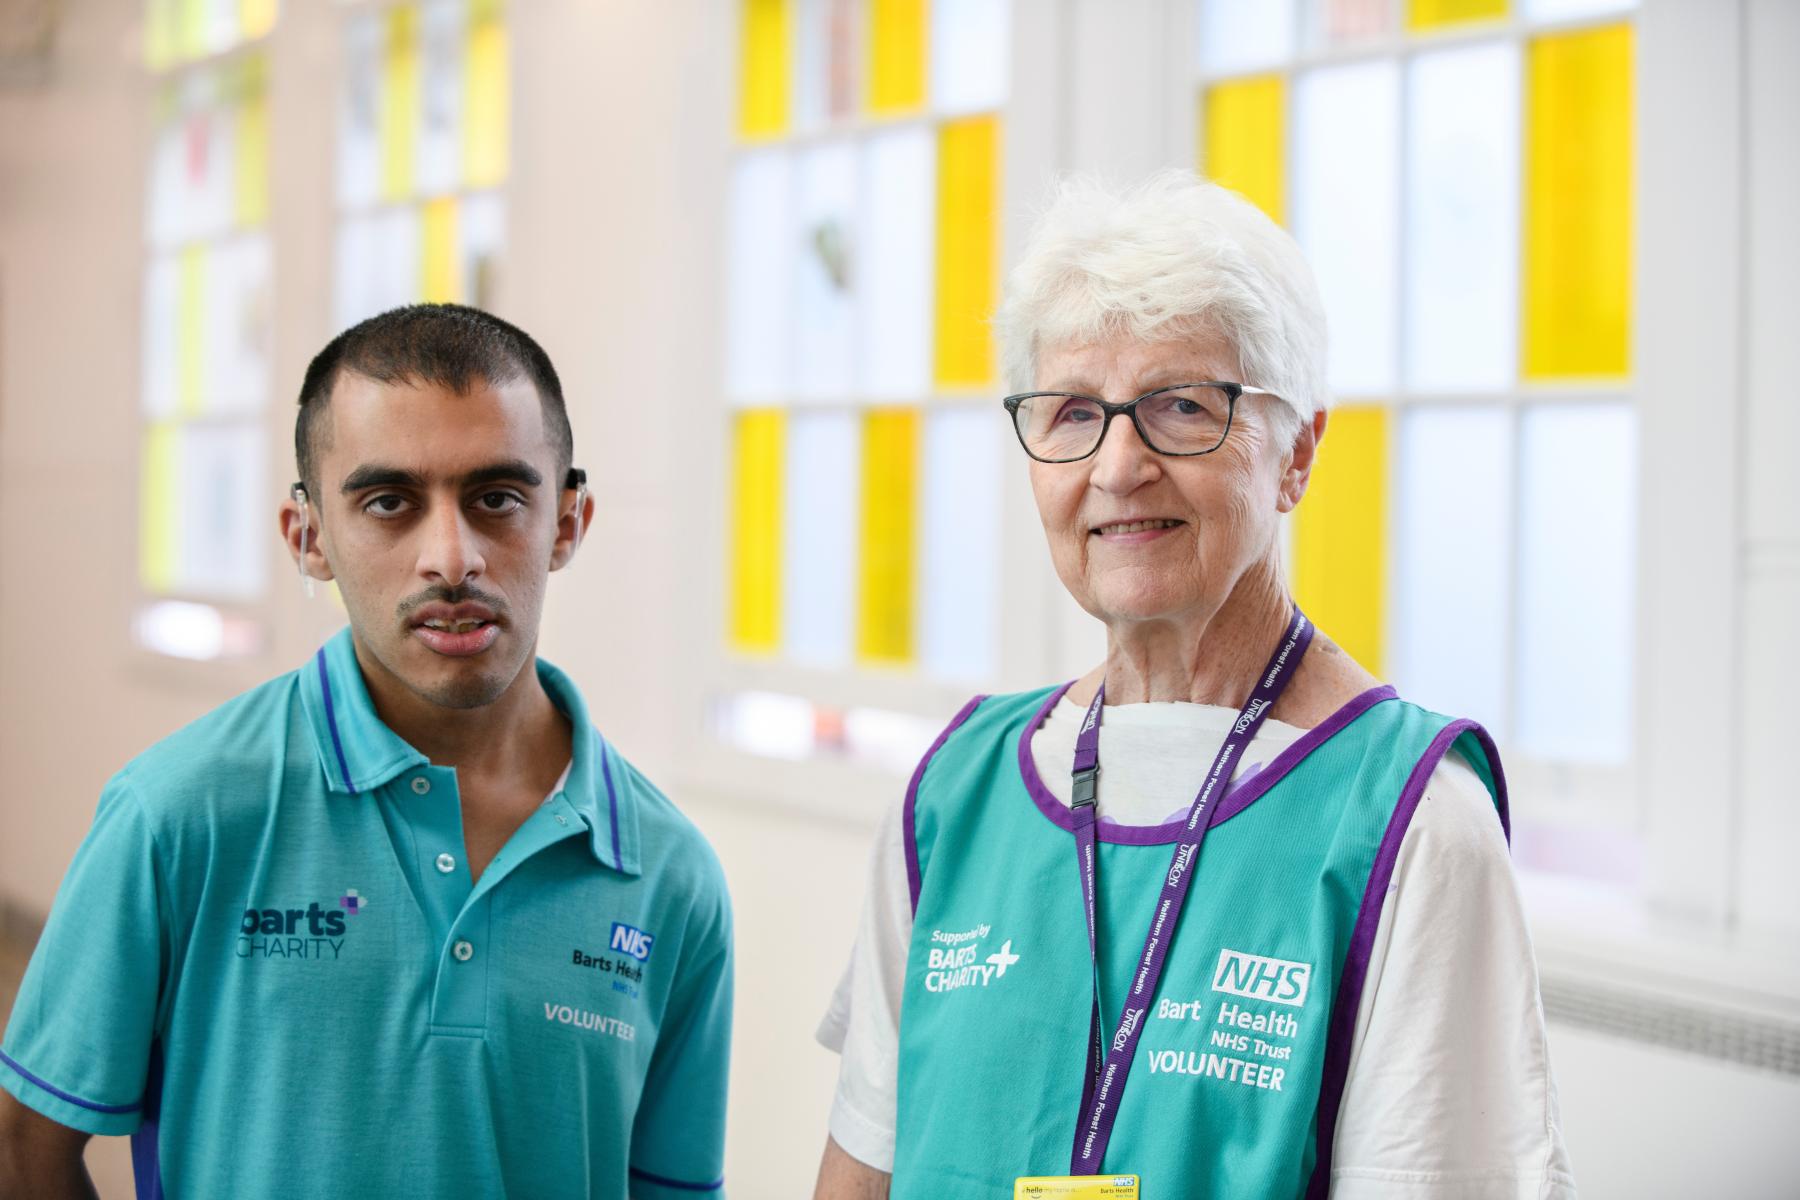 Two Barts Health volunteers stand together at Whipps Cross Hospital